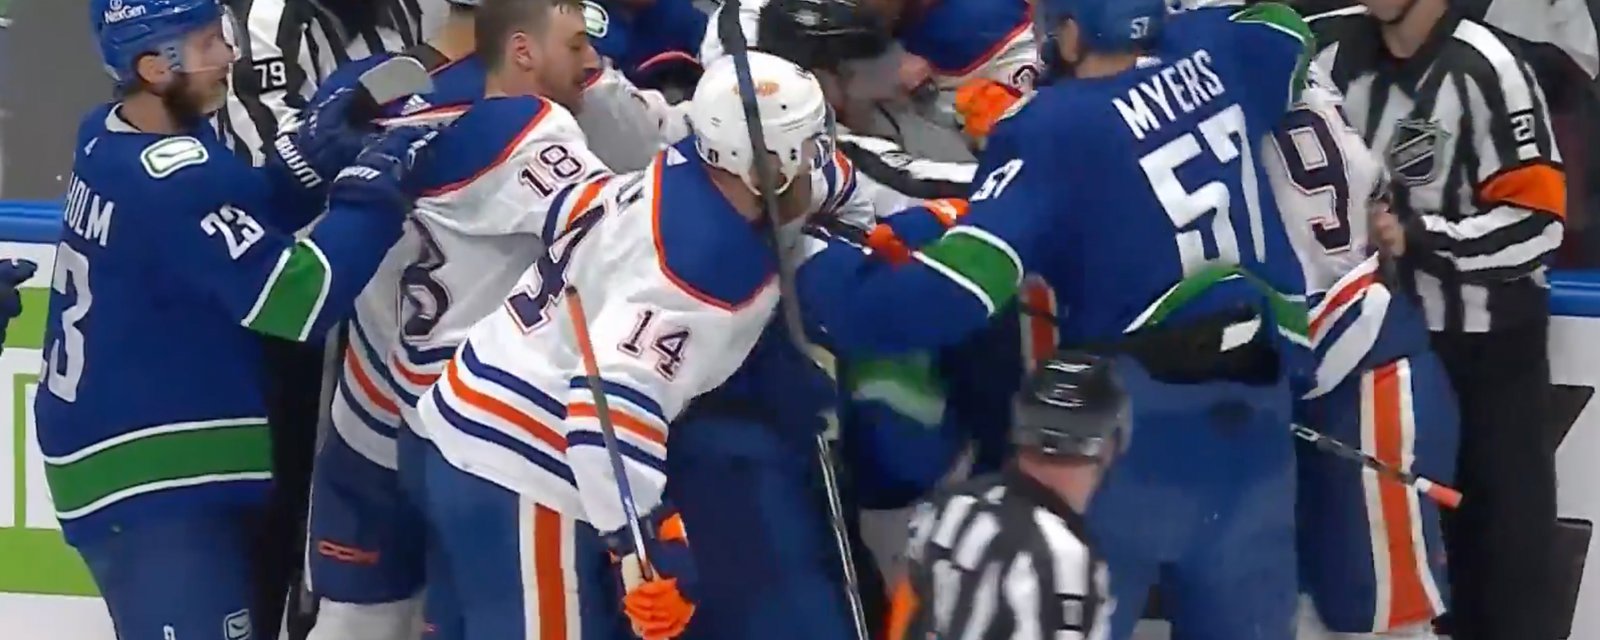 Full line brawl erupts with Connor McDavid and Leon Draisaitl in the middle of it!